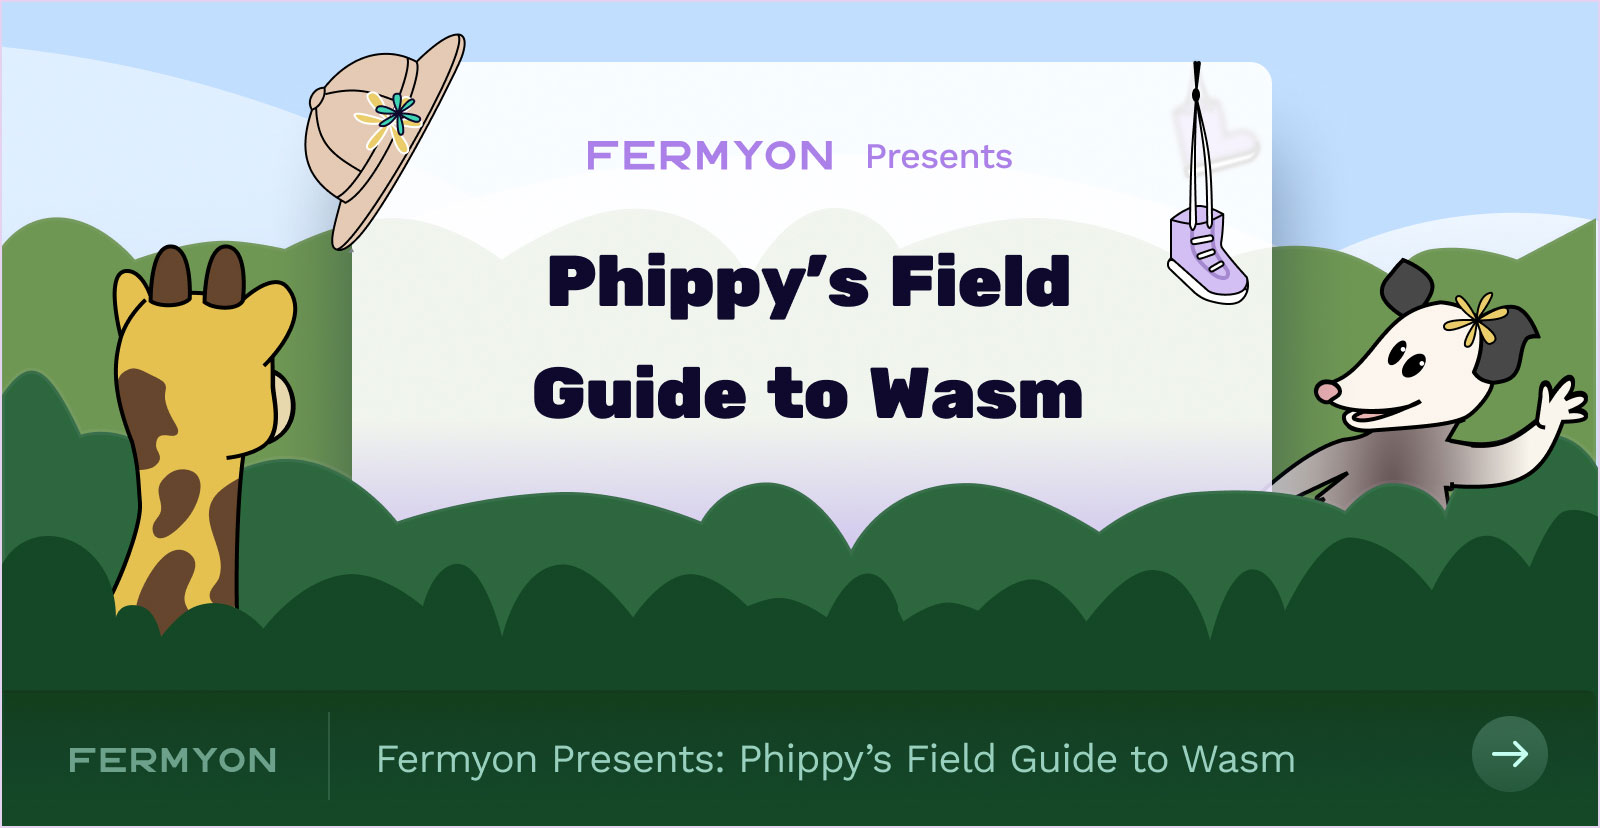 Fermyon Presents: Phippy’s Field Guide to Wasm